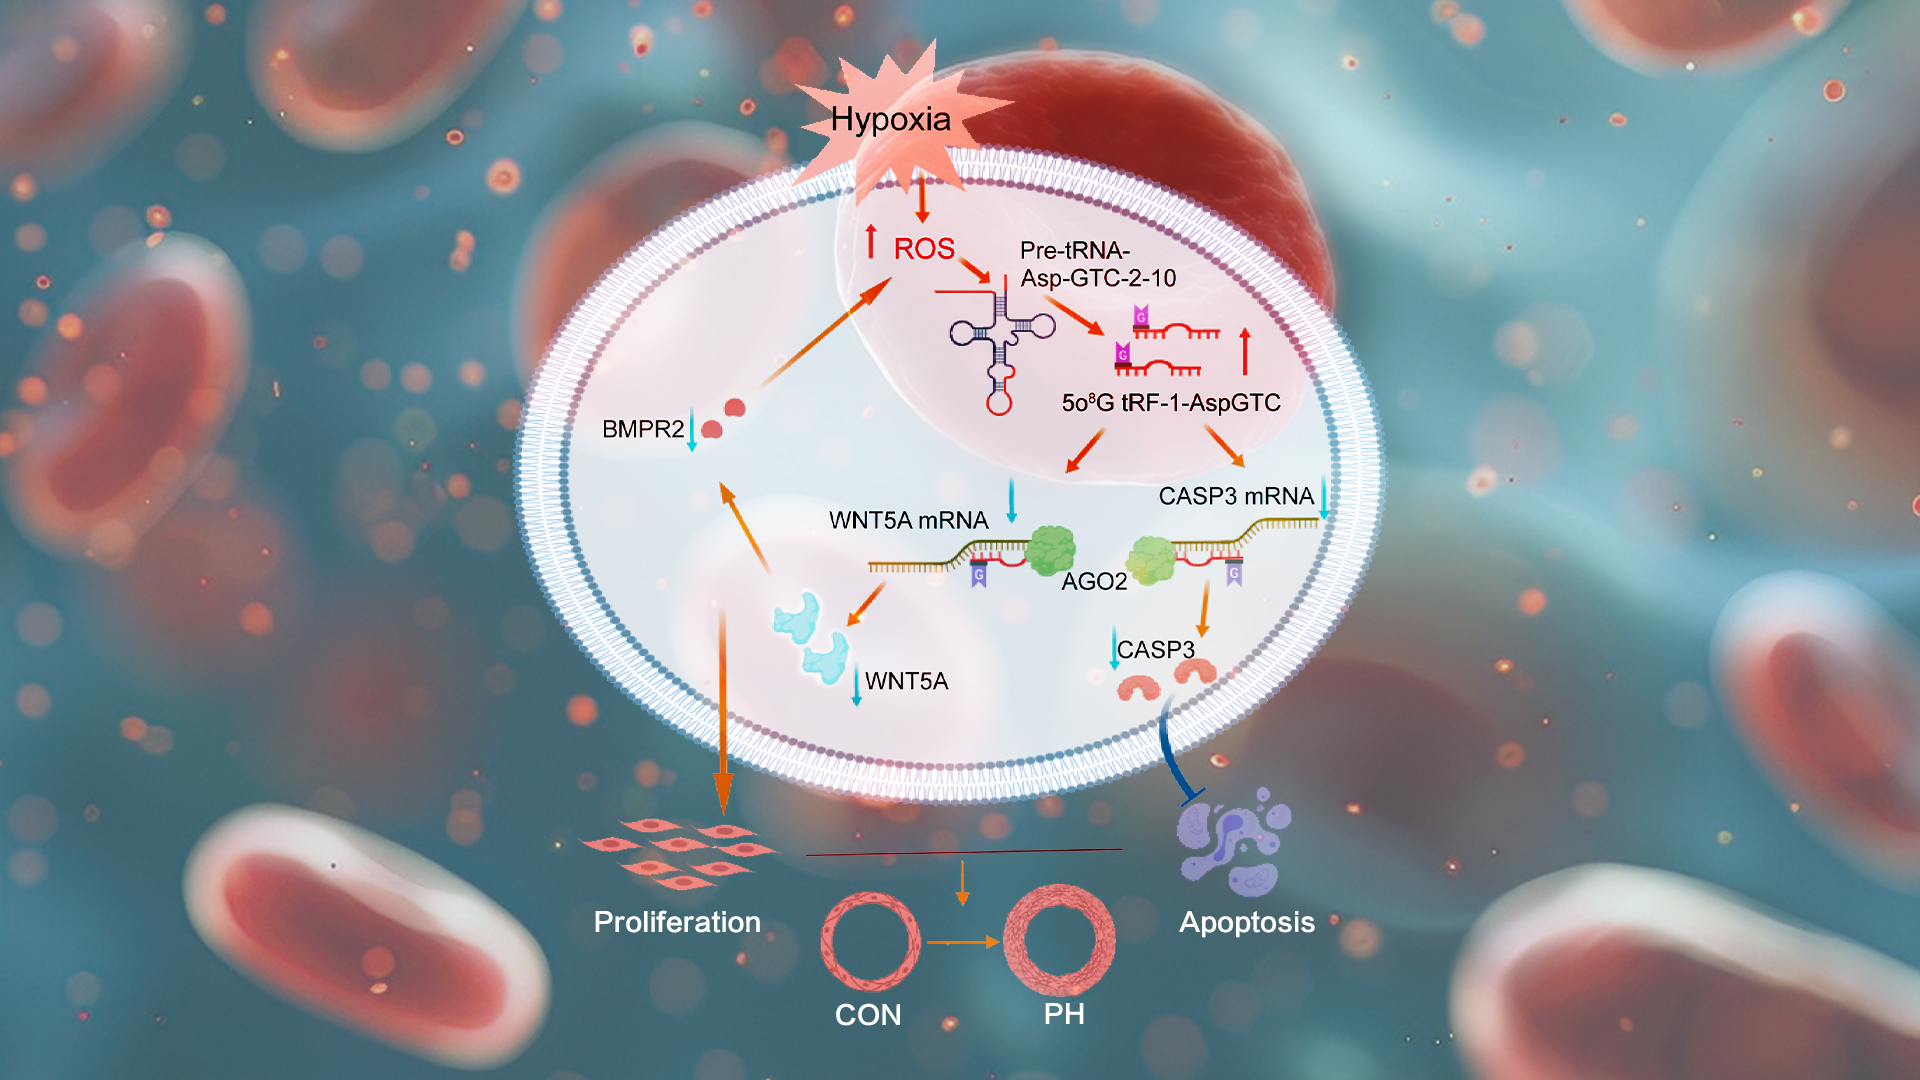 Researchers find that site-specific o8G modification of tRF-1-AspGTC emerges as promising target for pulmonary hypertension therapy